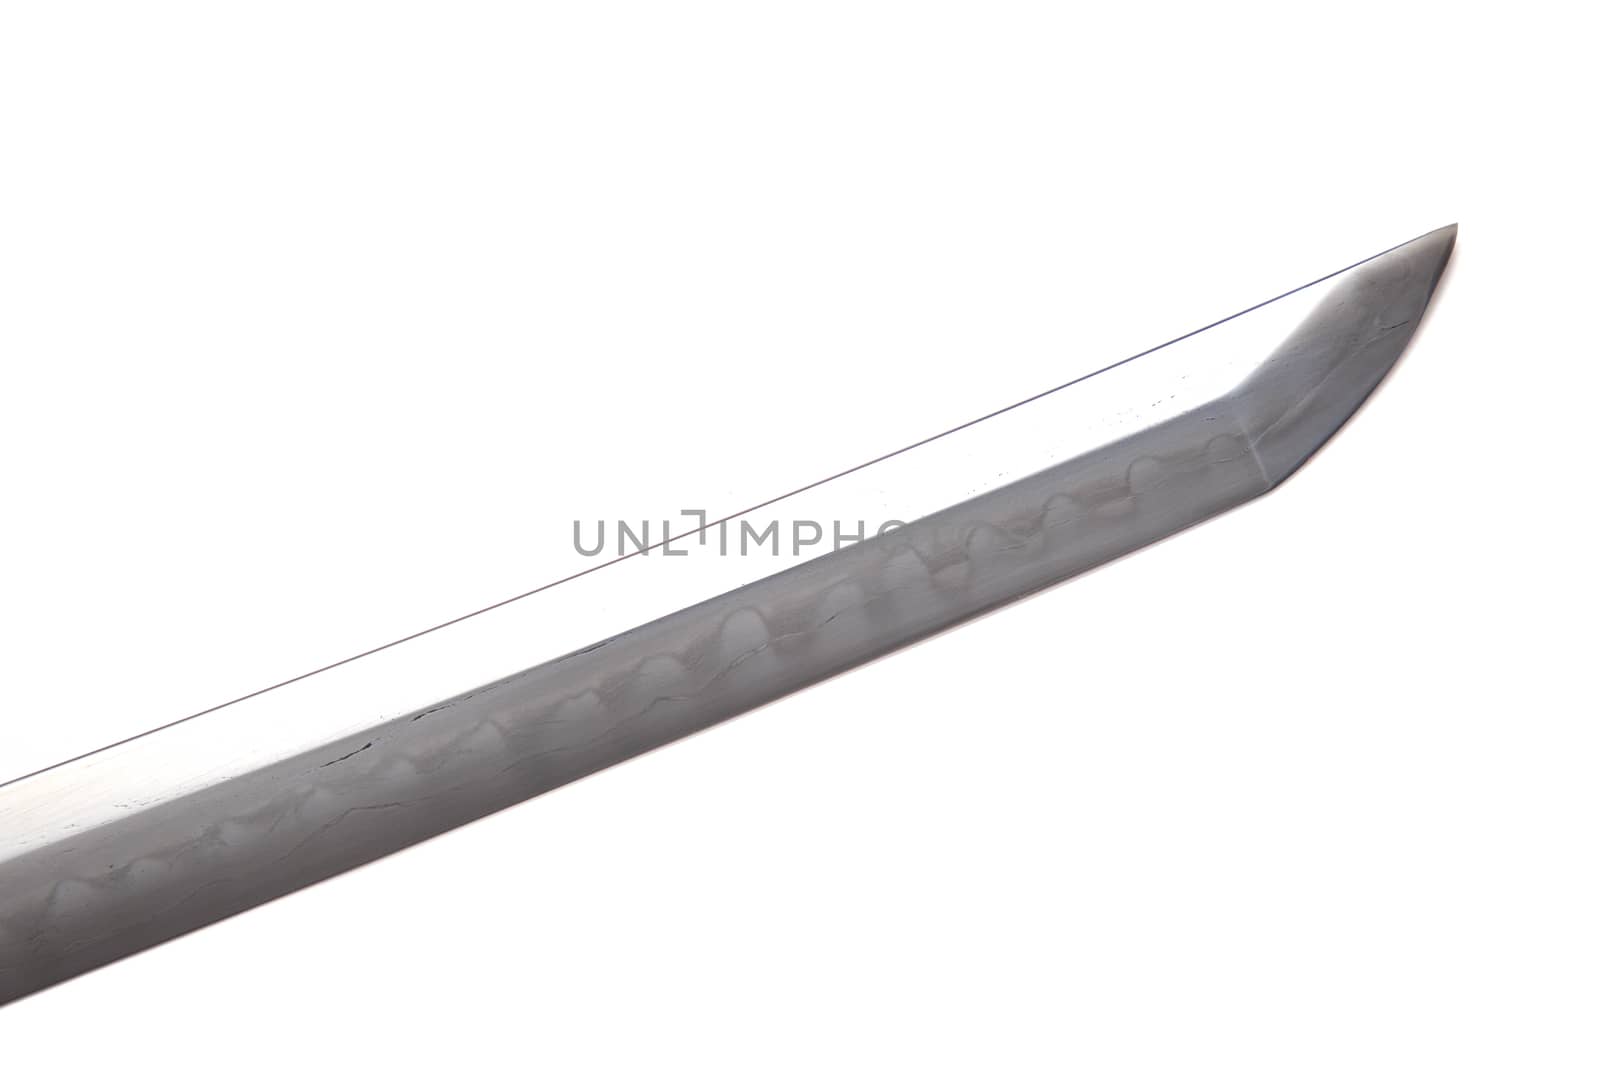 Japanese sword blade (made in China) on white background.  The blacksmith forged several folds until several layers were formed. Can be seen clearly on the surface. Soft focus. by joker3753